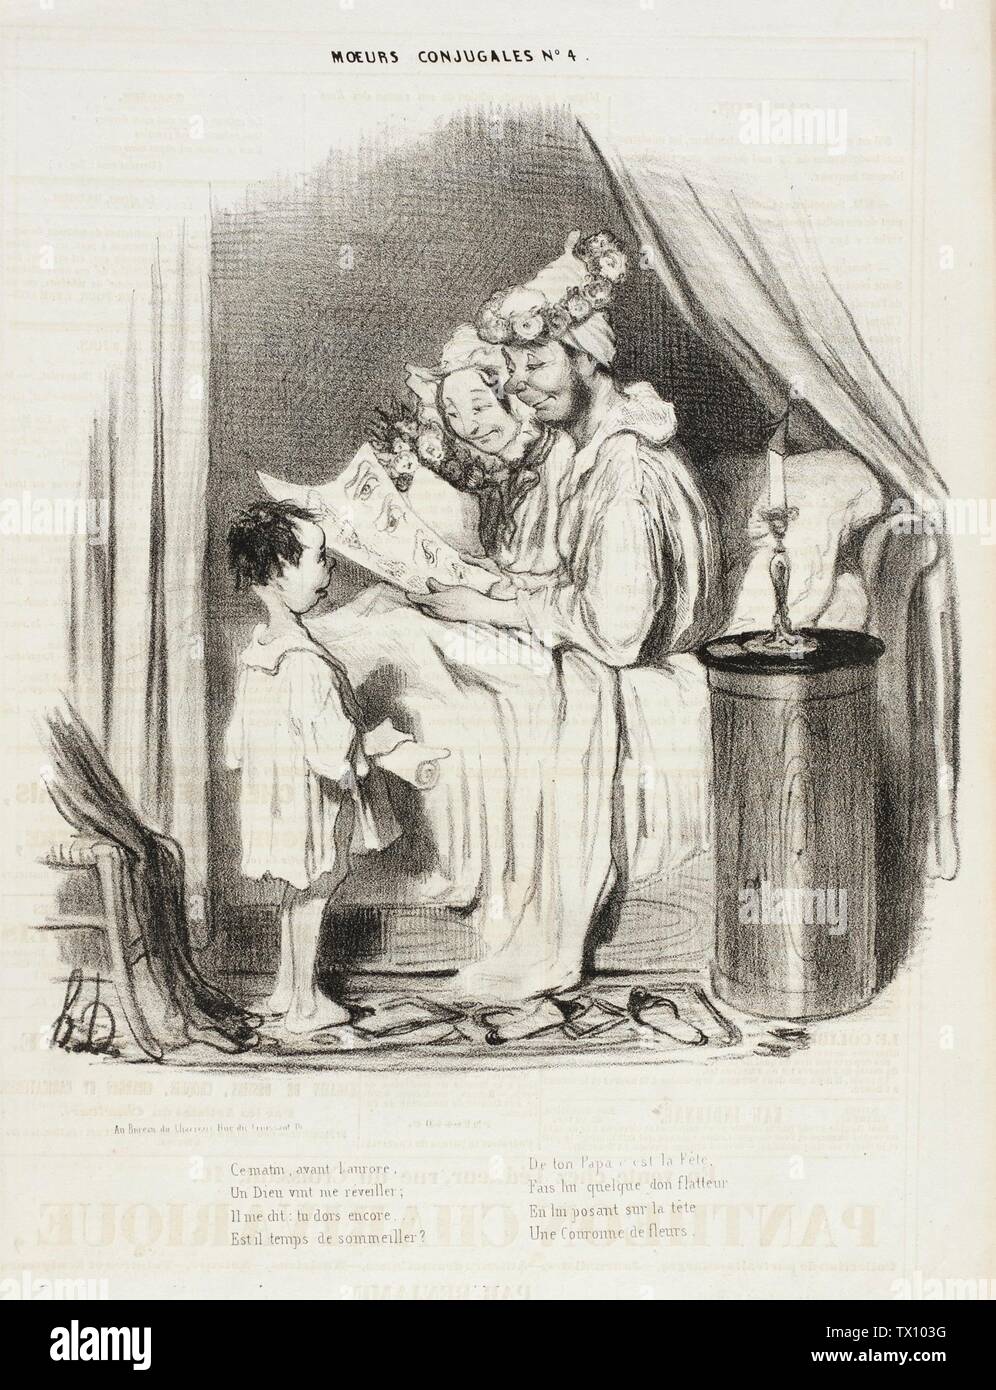 Ce matin, avant l'aurore, un Dieu vint me reveiller...;  France, 1839 Series: Moeurs Conjugales, no. 4 Periodical: Le Charivari, 9 June 1839 Prints; lithographs Lithograph Gift of Mr. and Mrs. Stanley Talpis (54.71.57) Prints and Drawings; 1839date QS:P571,+1839-00-00T00:00:00Z/9; Stock Photo